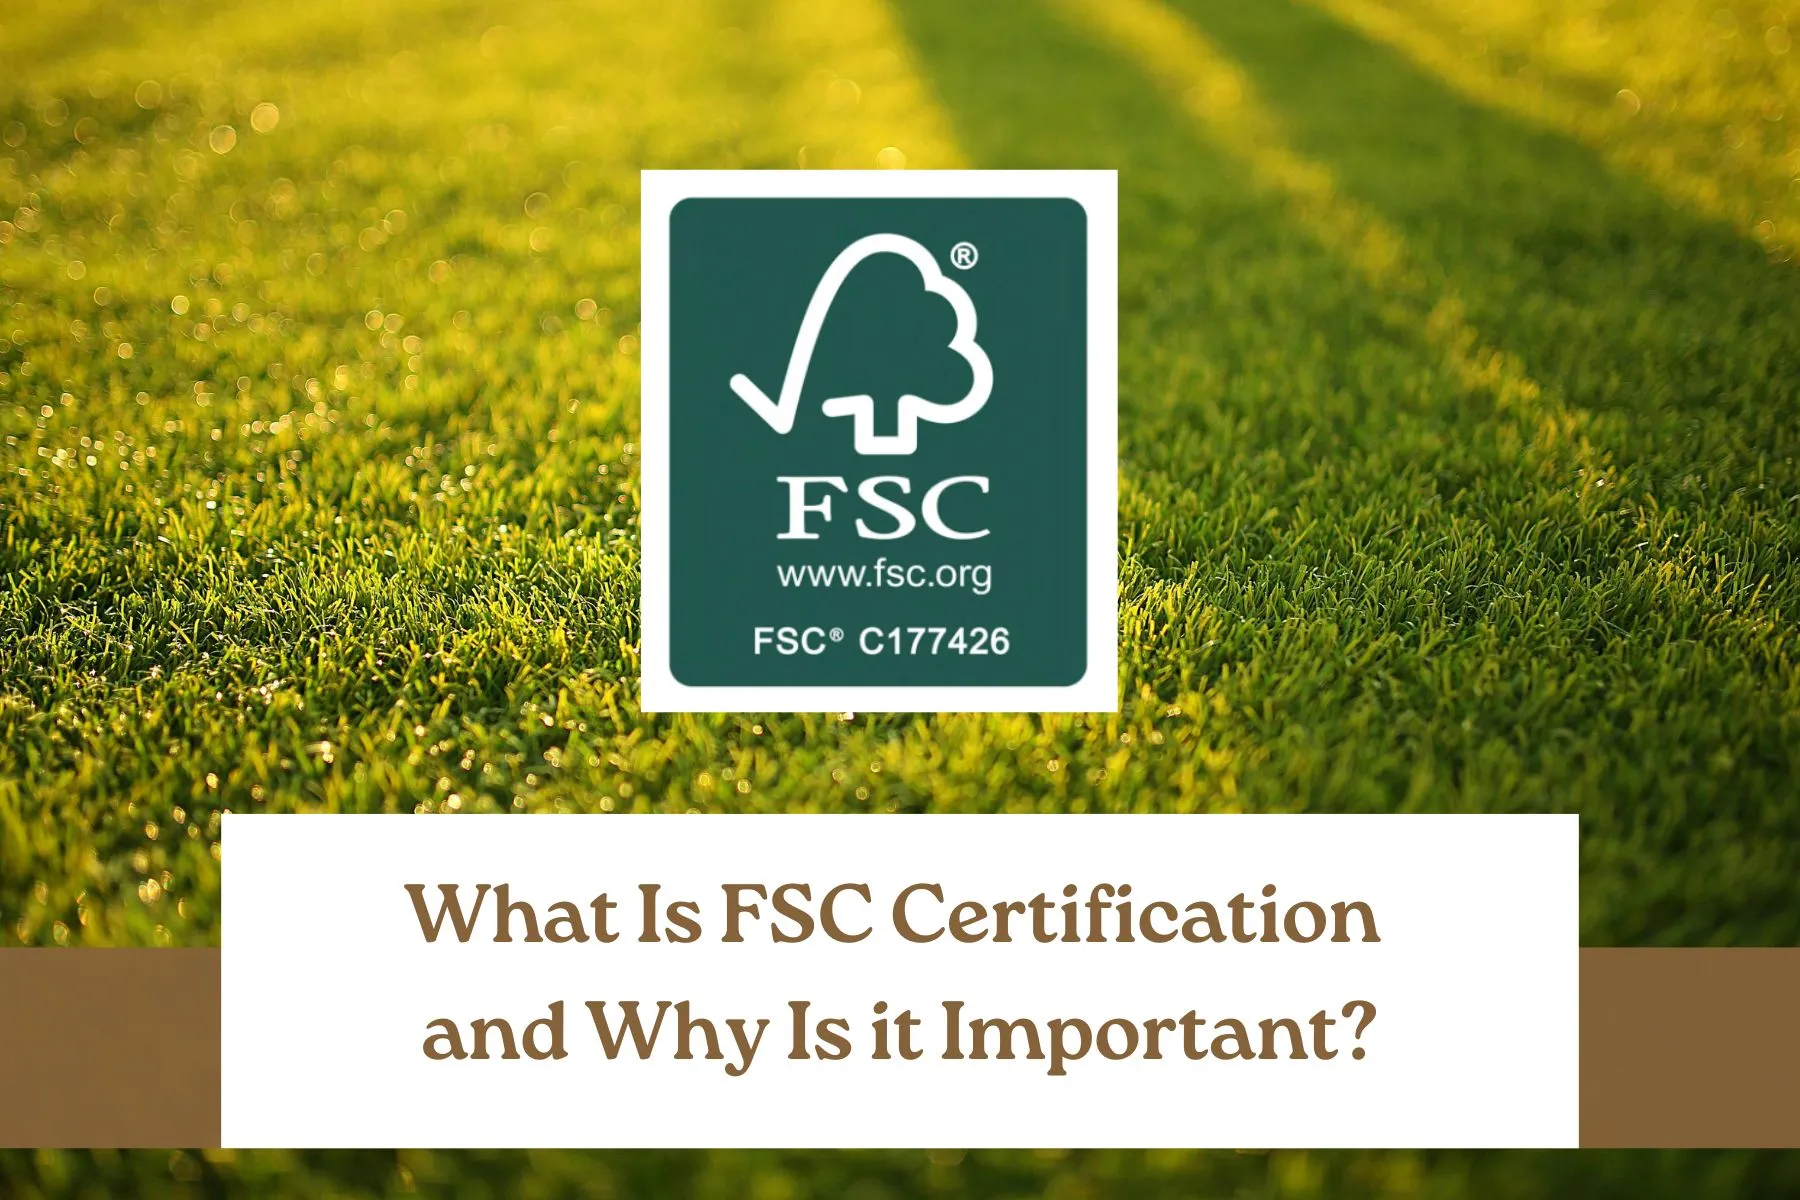 What Is FSC Certification and Why Is it Important?